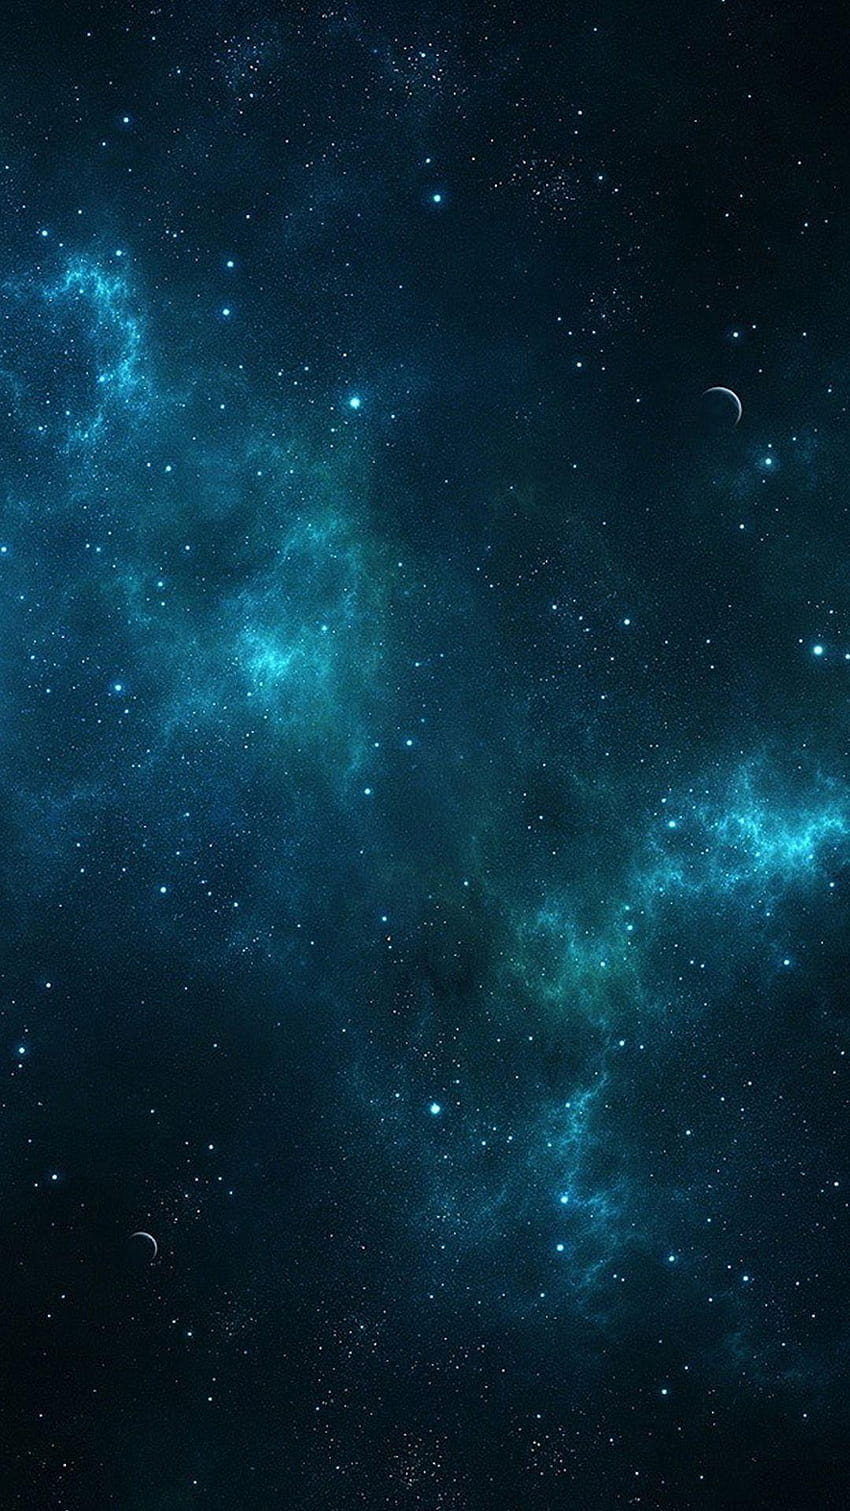 Deep Blue Space IPhone 5 Mobile Imag, iphone mobile HD phone wallpaper